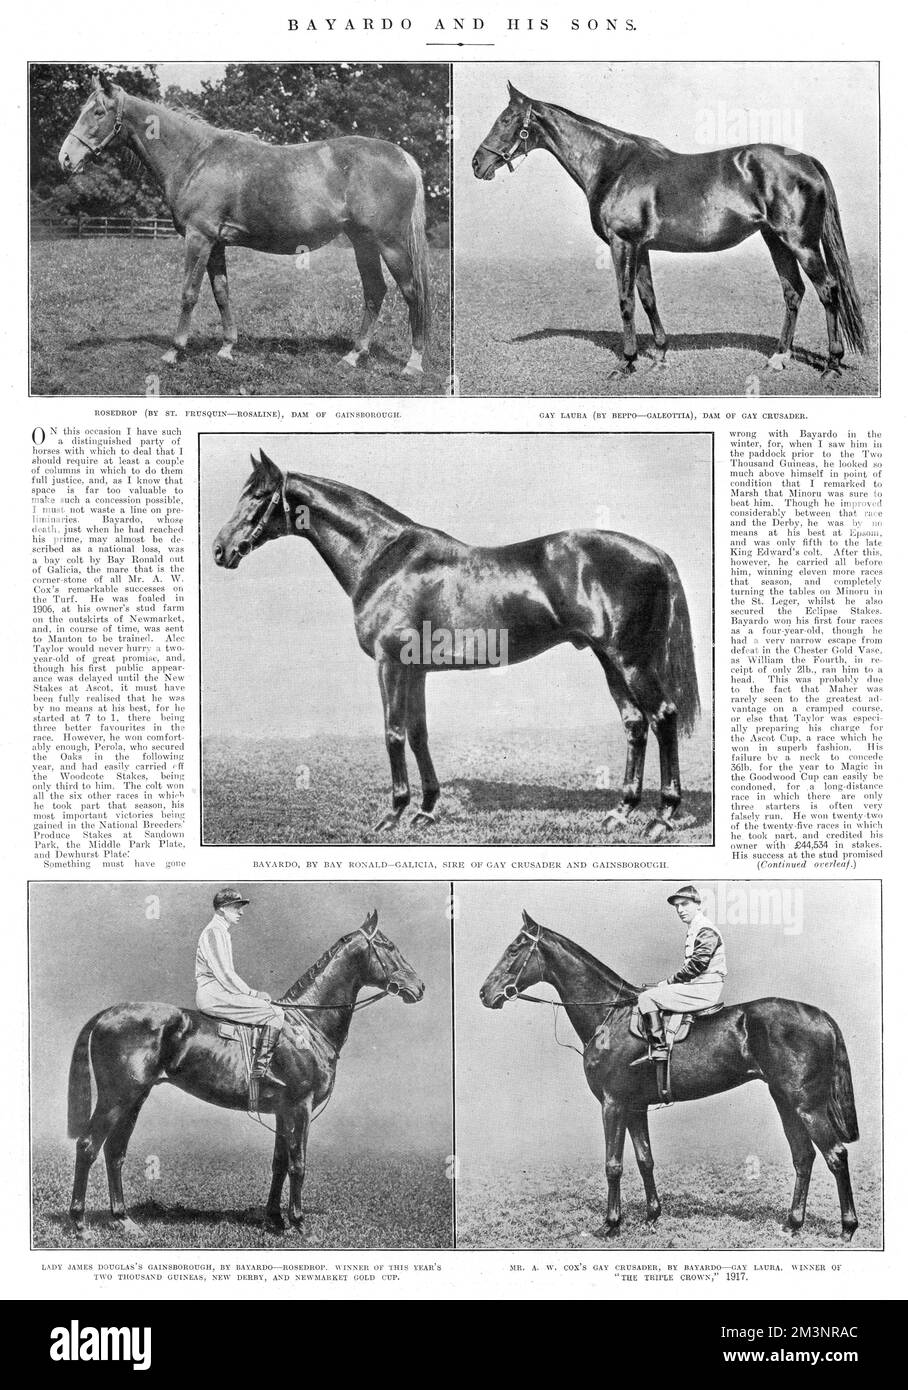 Lady James Douglas's thoroughbred racehorse, 'Gainsborough', who won the Triple Crown in 1918. Gainsborough's father was Bayardo and his mother, Rosedrop.     Date: 1918 Stock Photo